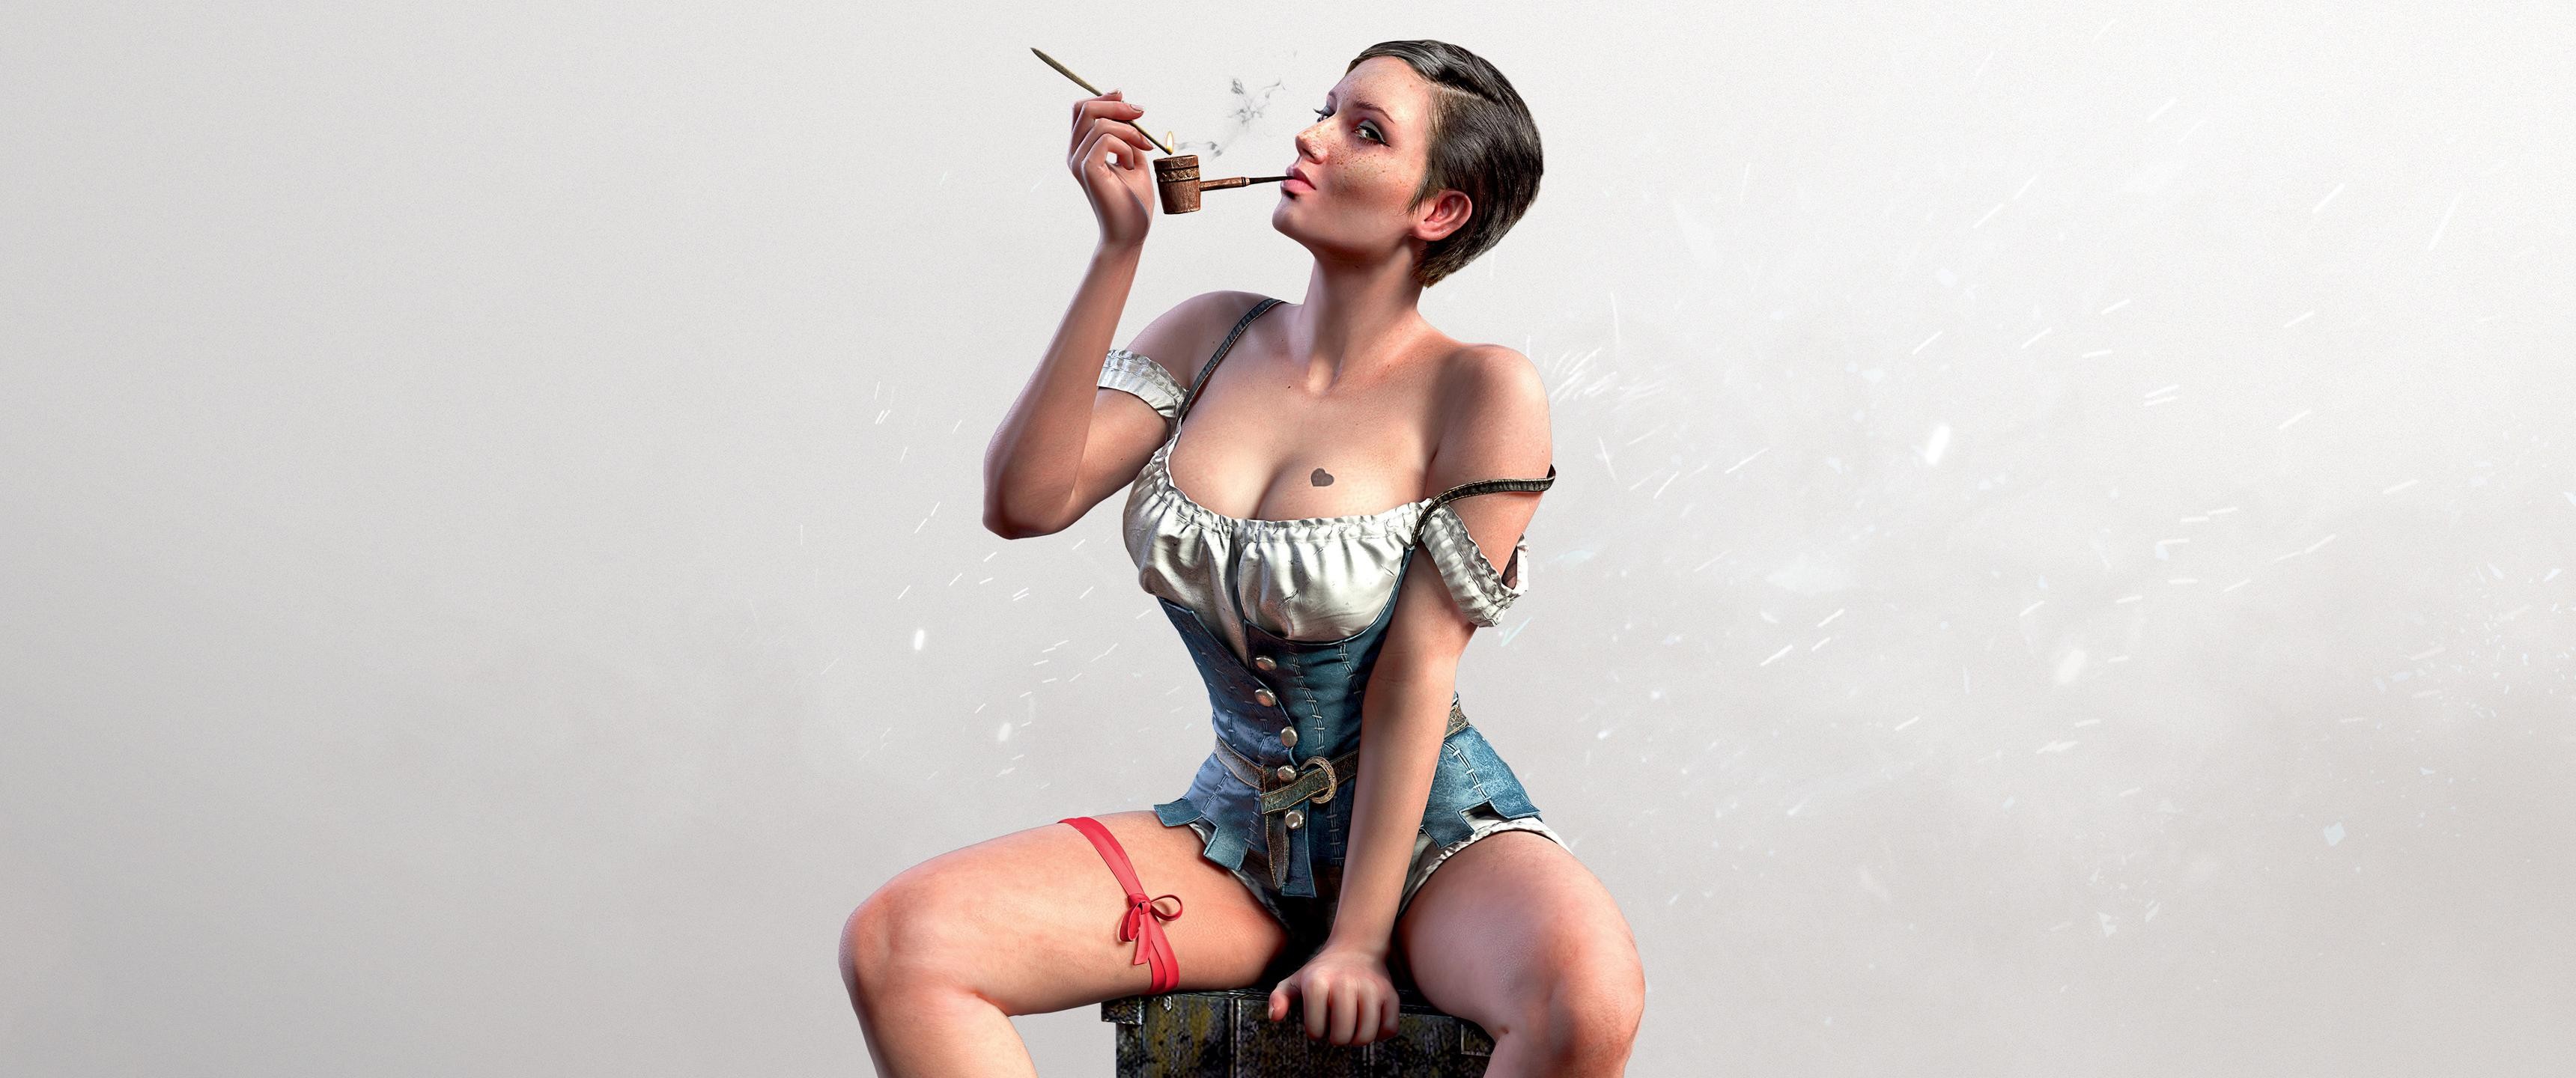 General 3440x1440 women brunette short hair cleavage tattoo freckles The Witcher 3: Wild Hunt sitting smoking fantasy art fantasy girl Heart (Tattoo) video game girls simple background RPG video games PC gaming spread legs inked girls